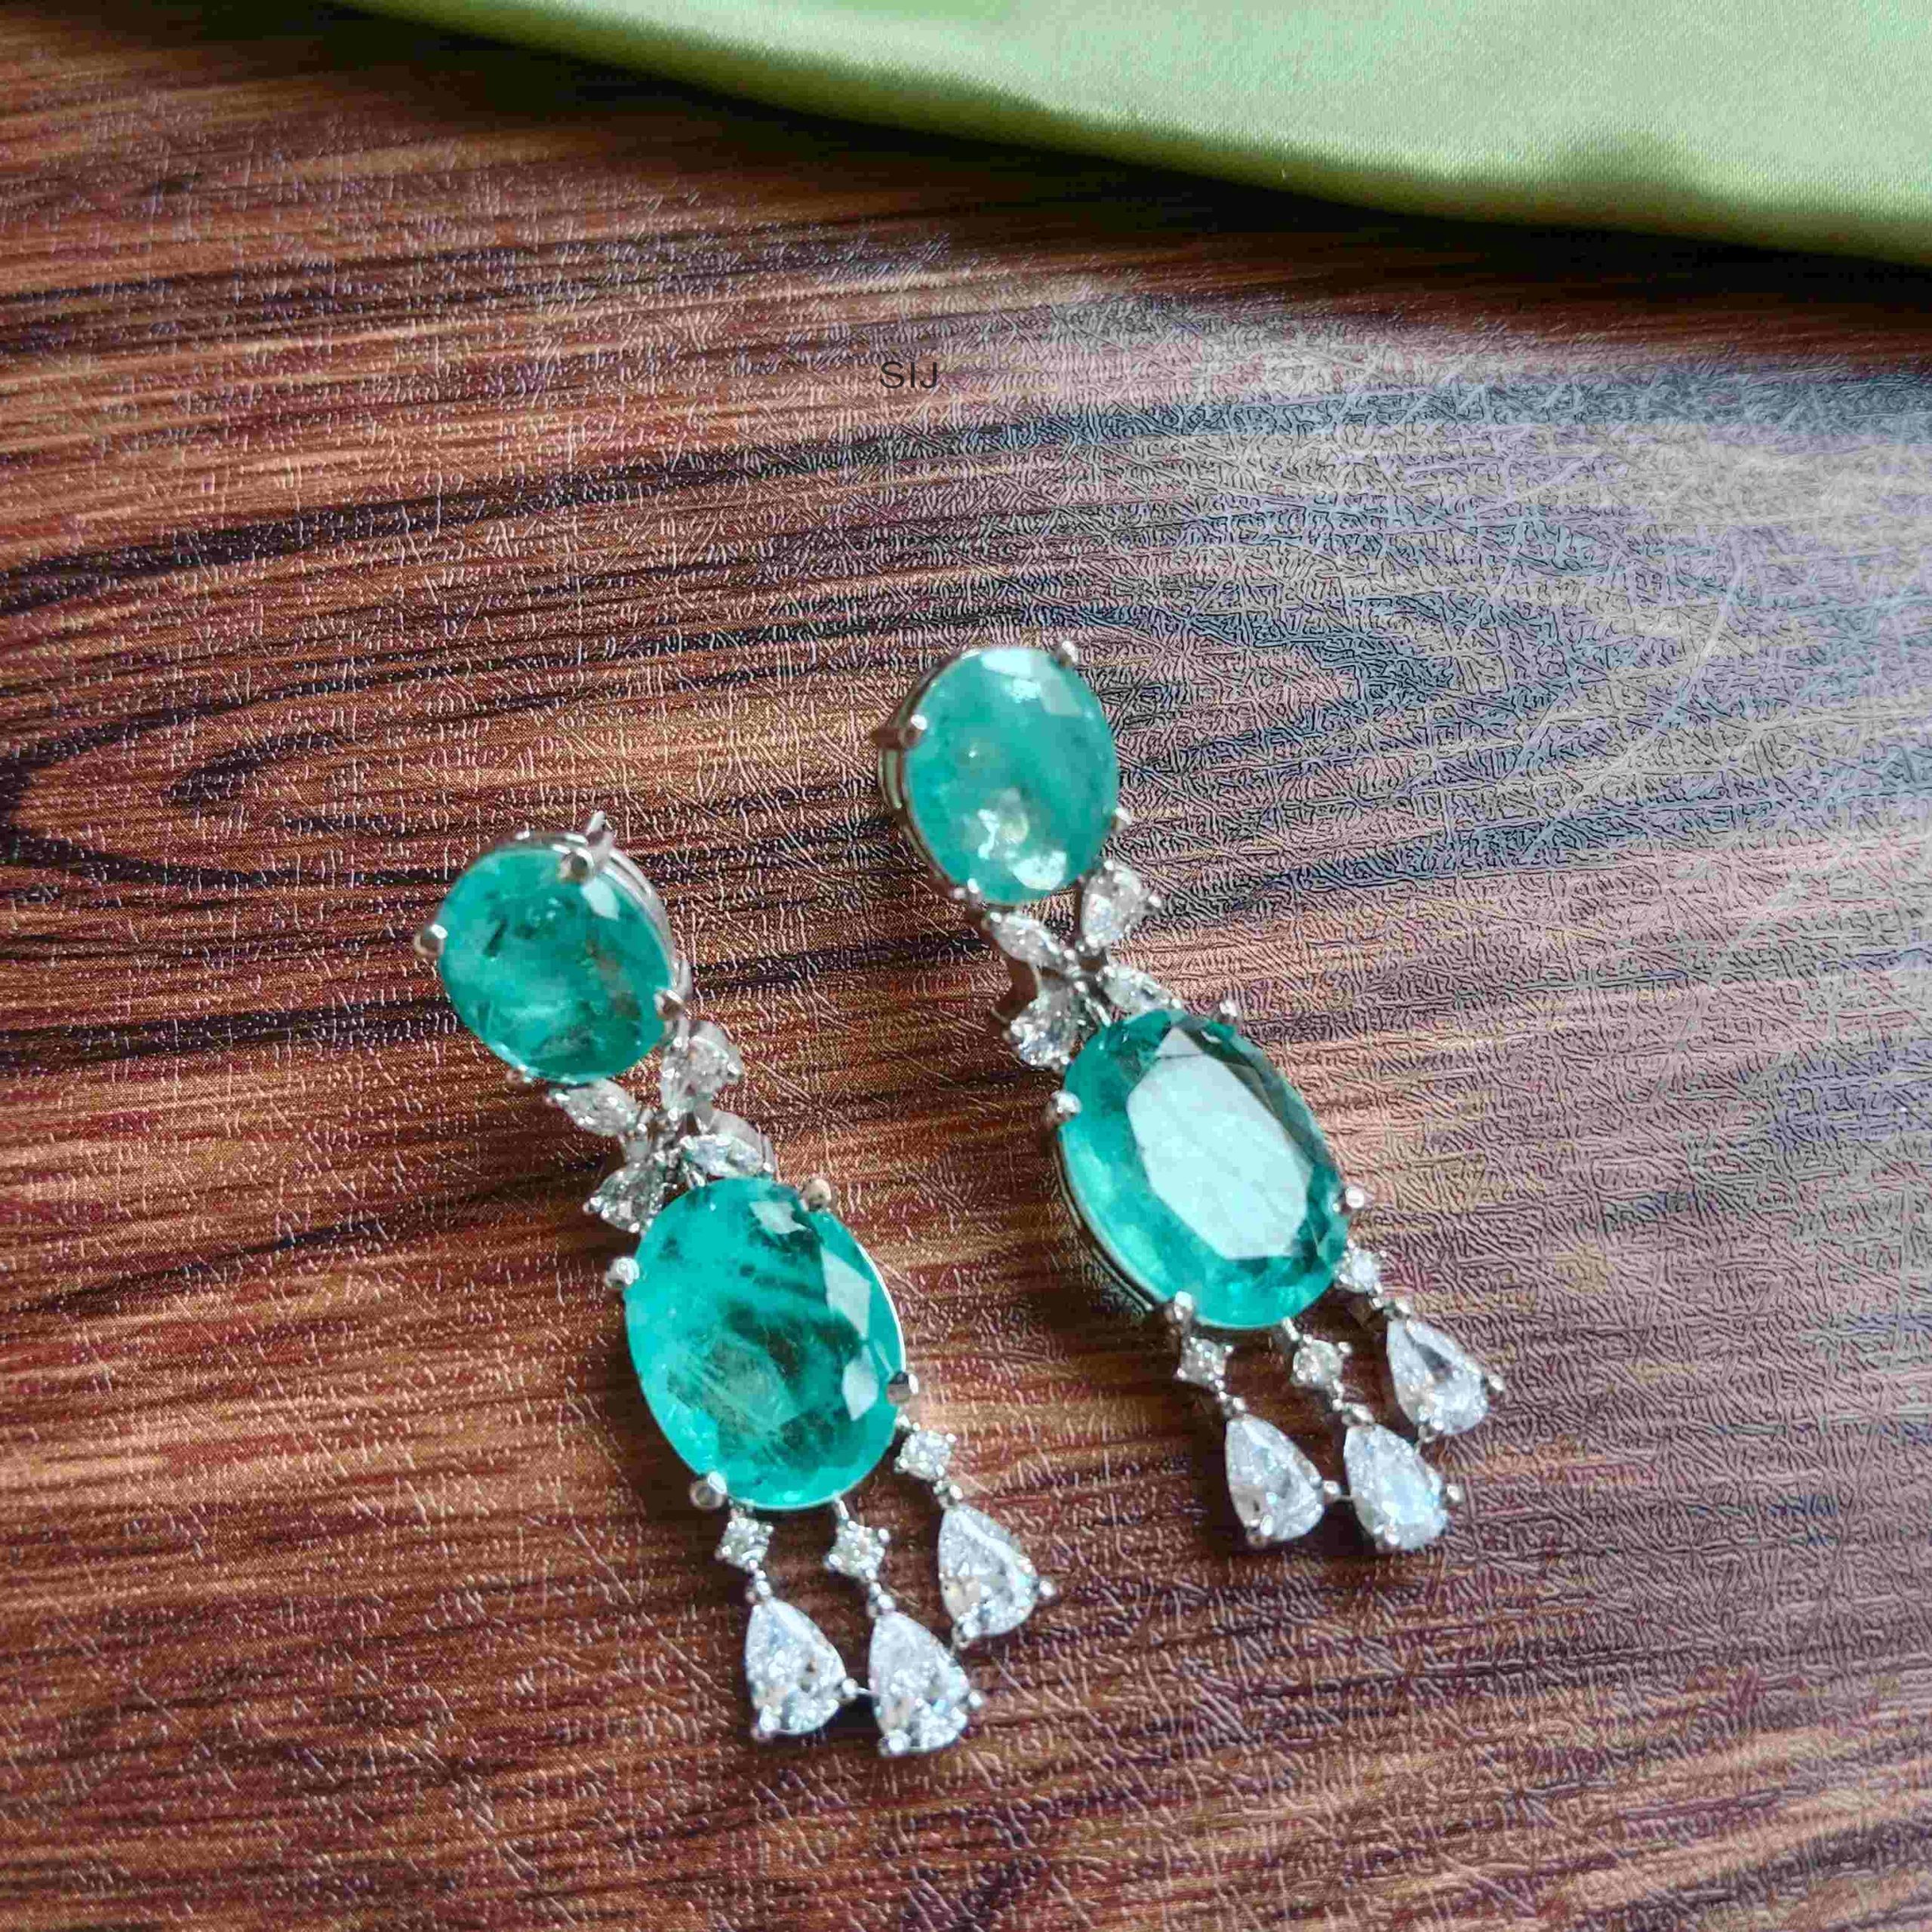 Green Double Stone Earrings with AD Stones Drops